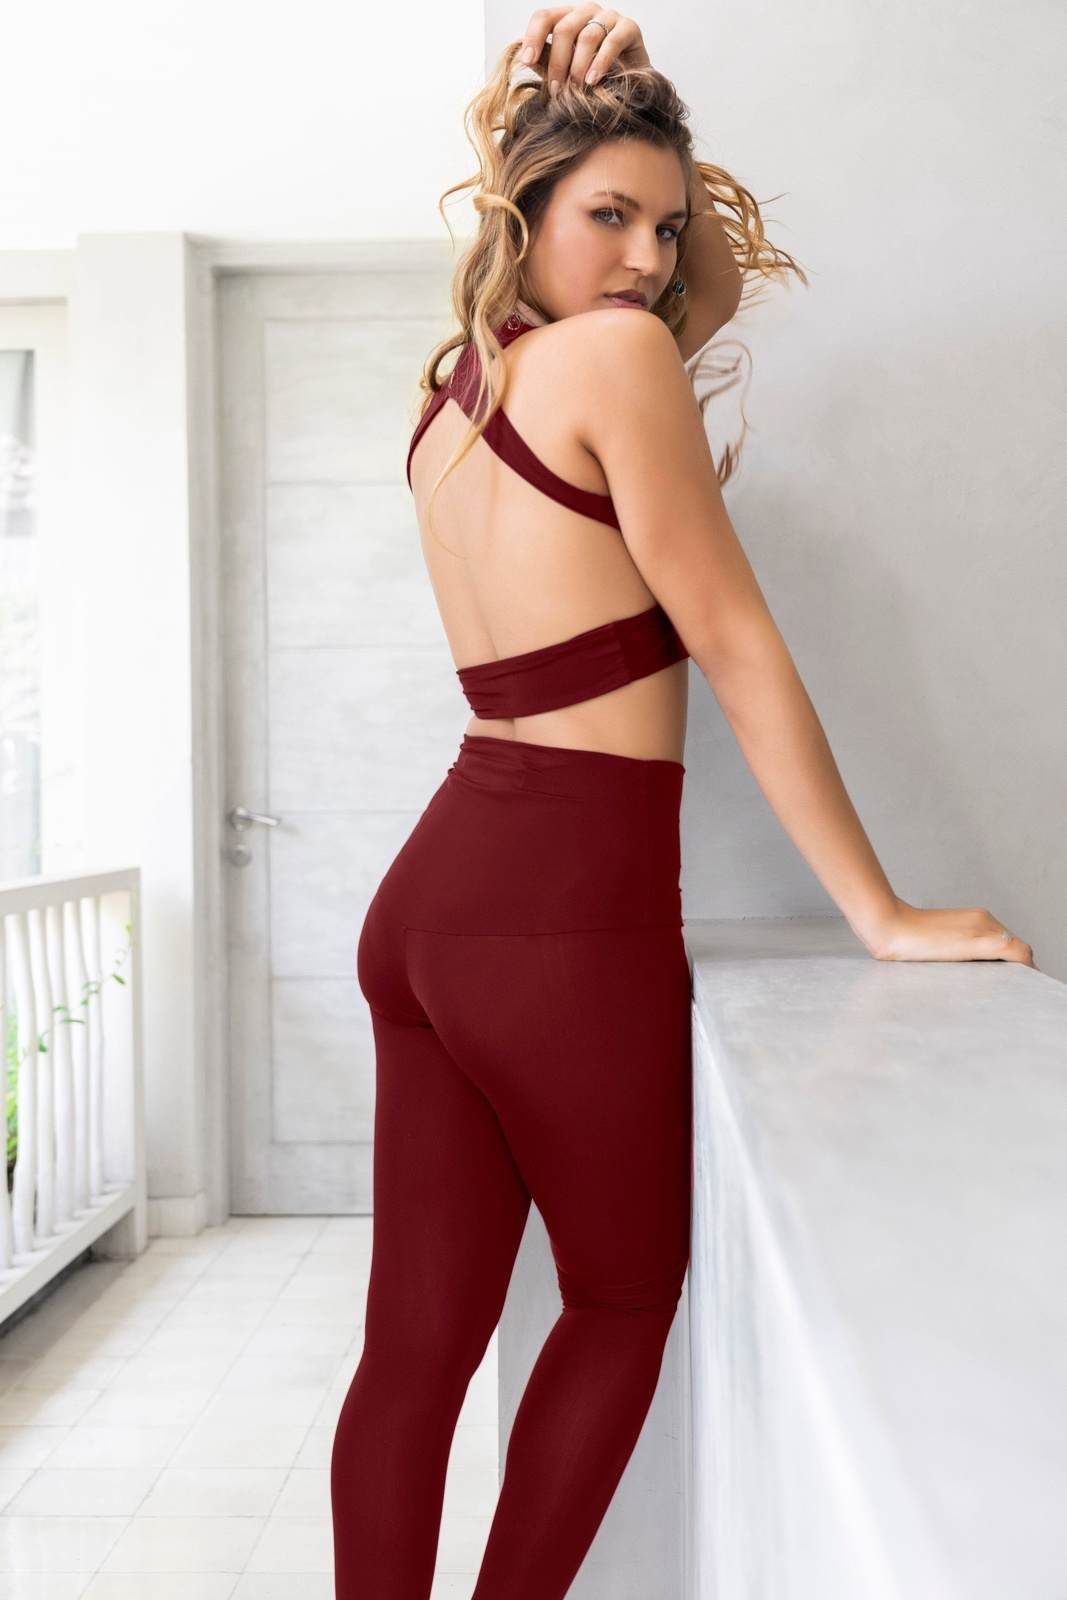 Dark Red Wine Colored Lounge Bra and high waisted leggings from Ekoluxe sustainable loungewear brand.